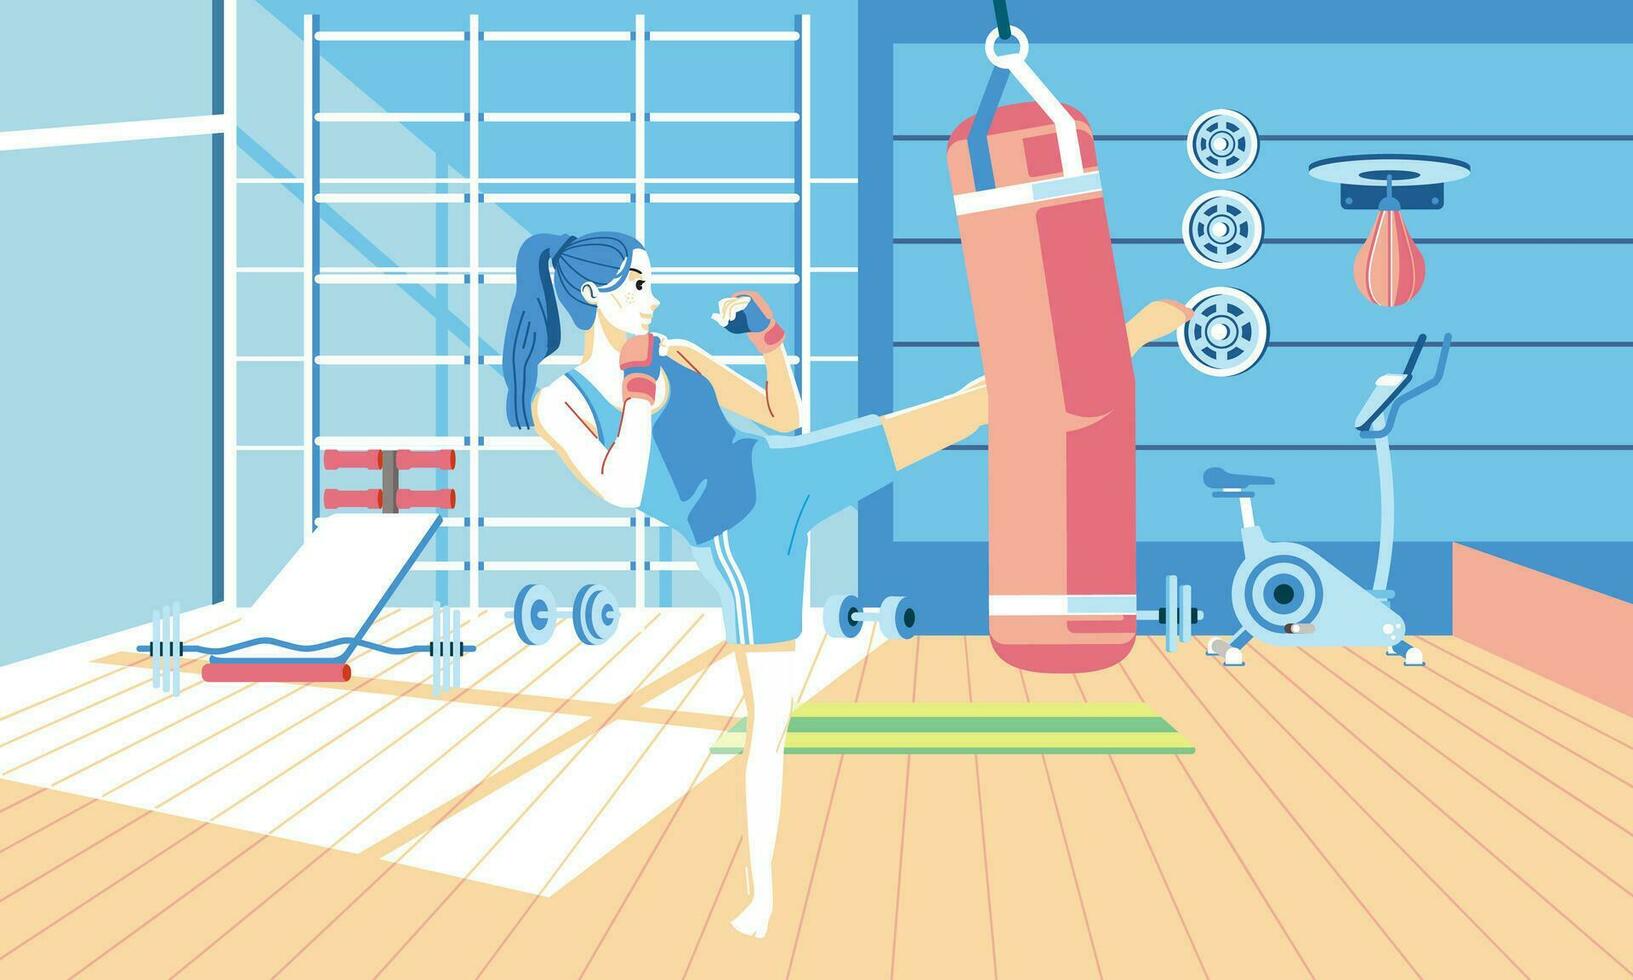 young girl doing kickboxing exercise at gym, with many gym equipment in the background vector